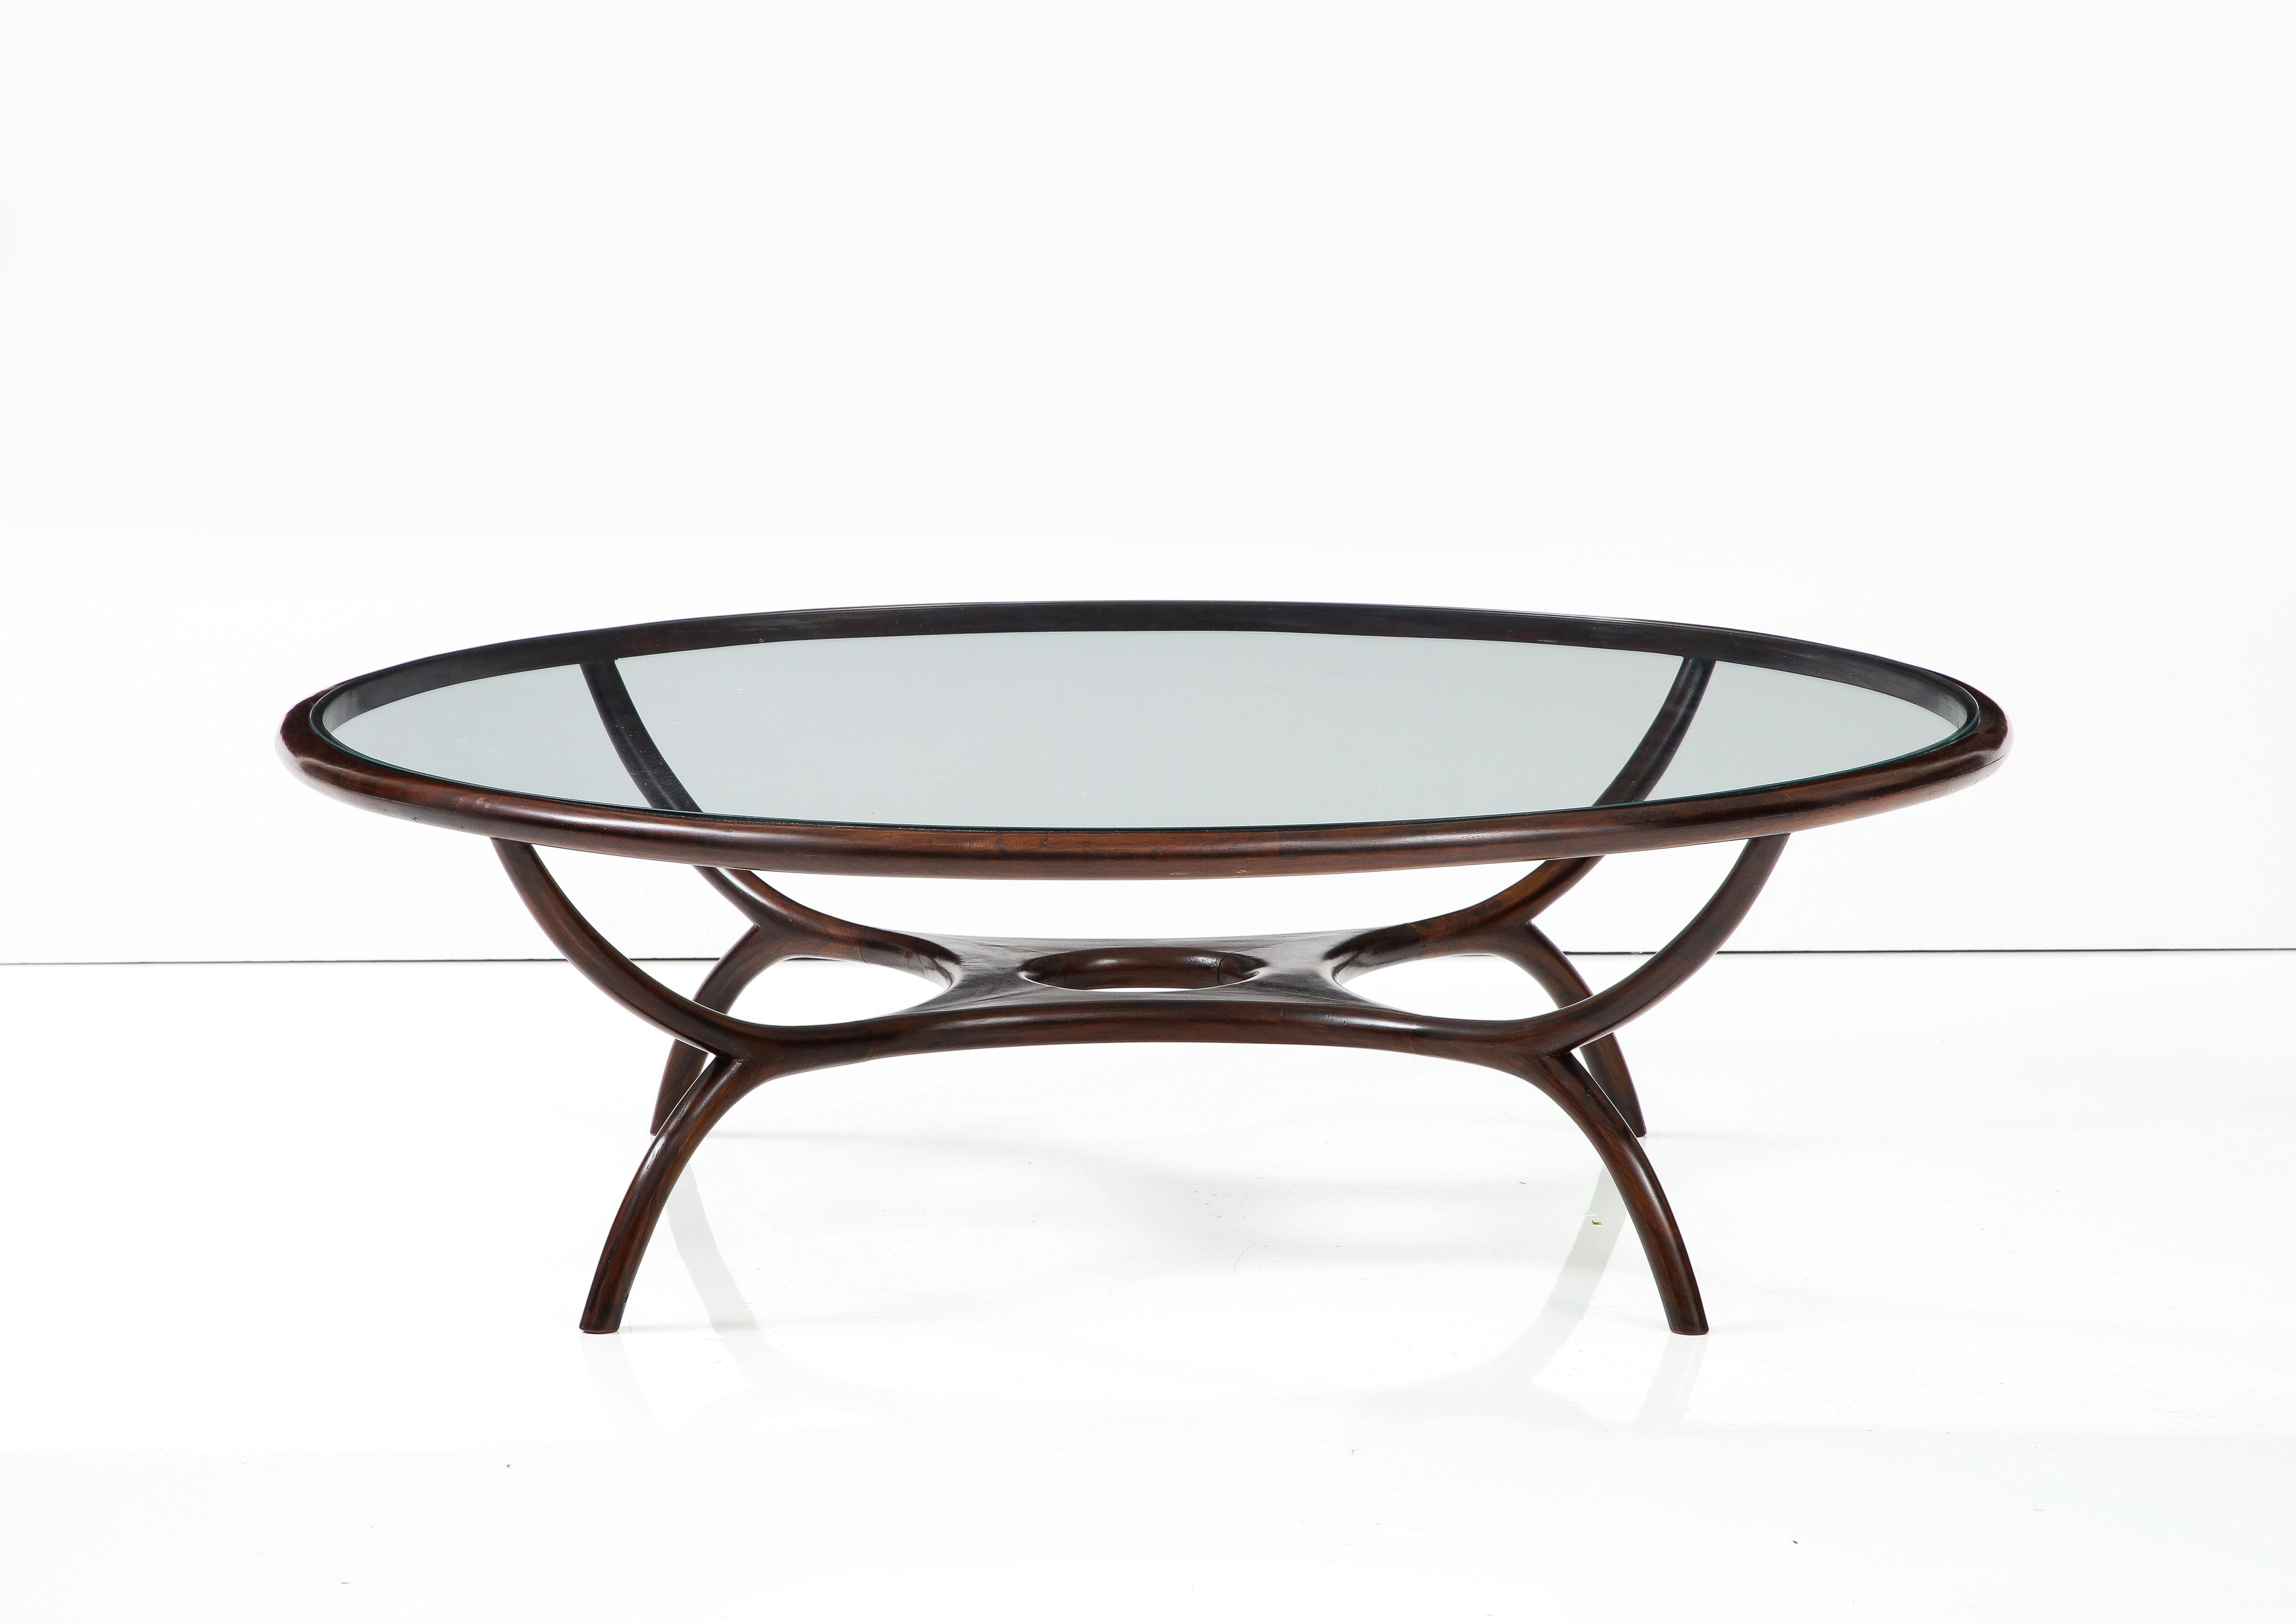 Mid-Century Modern Wood and Glass Center Table by Giuseppe Scapinelli, Brazil, 1960s

The Giuseppe Scapinelli center table is structured in solid wood with a nested glass top.
The nested glass top and the curvature of the legs are the outstanding